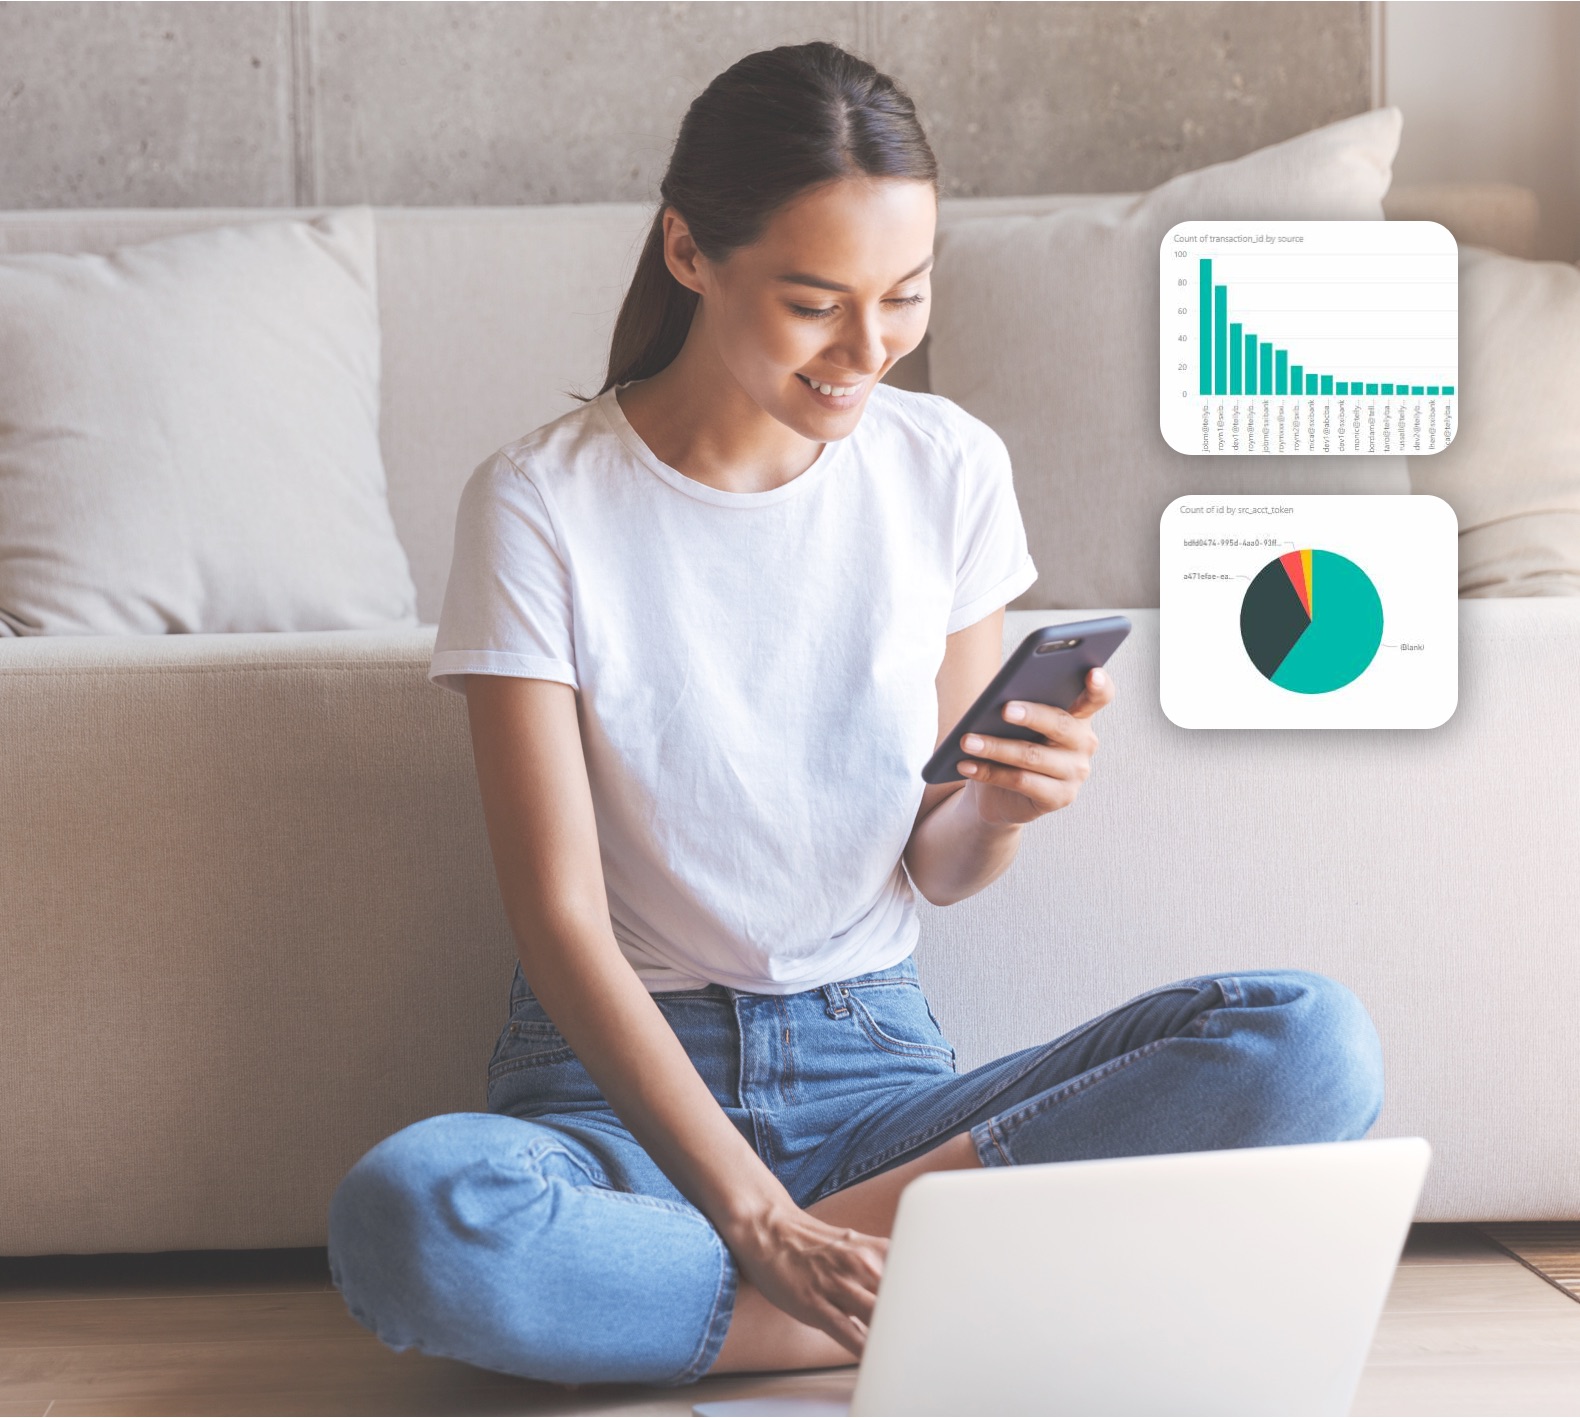 attractive lady holding phone with charts and graphs floating around her